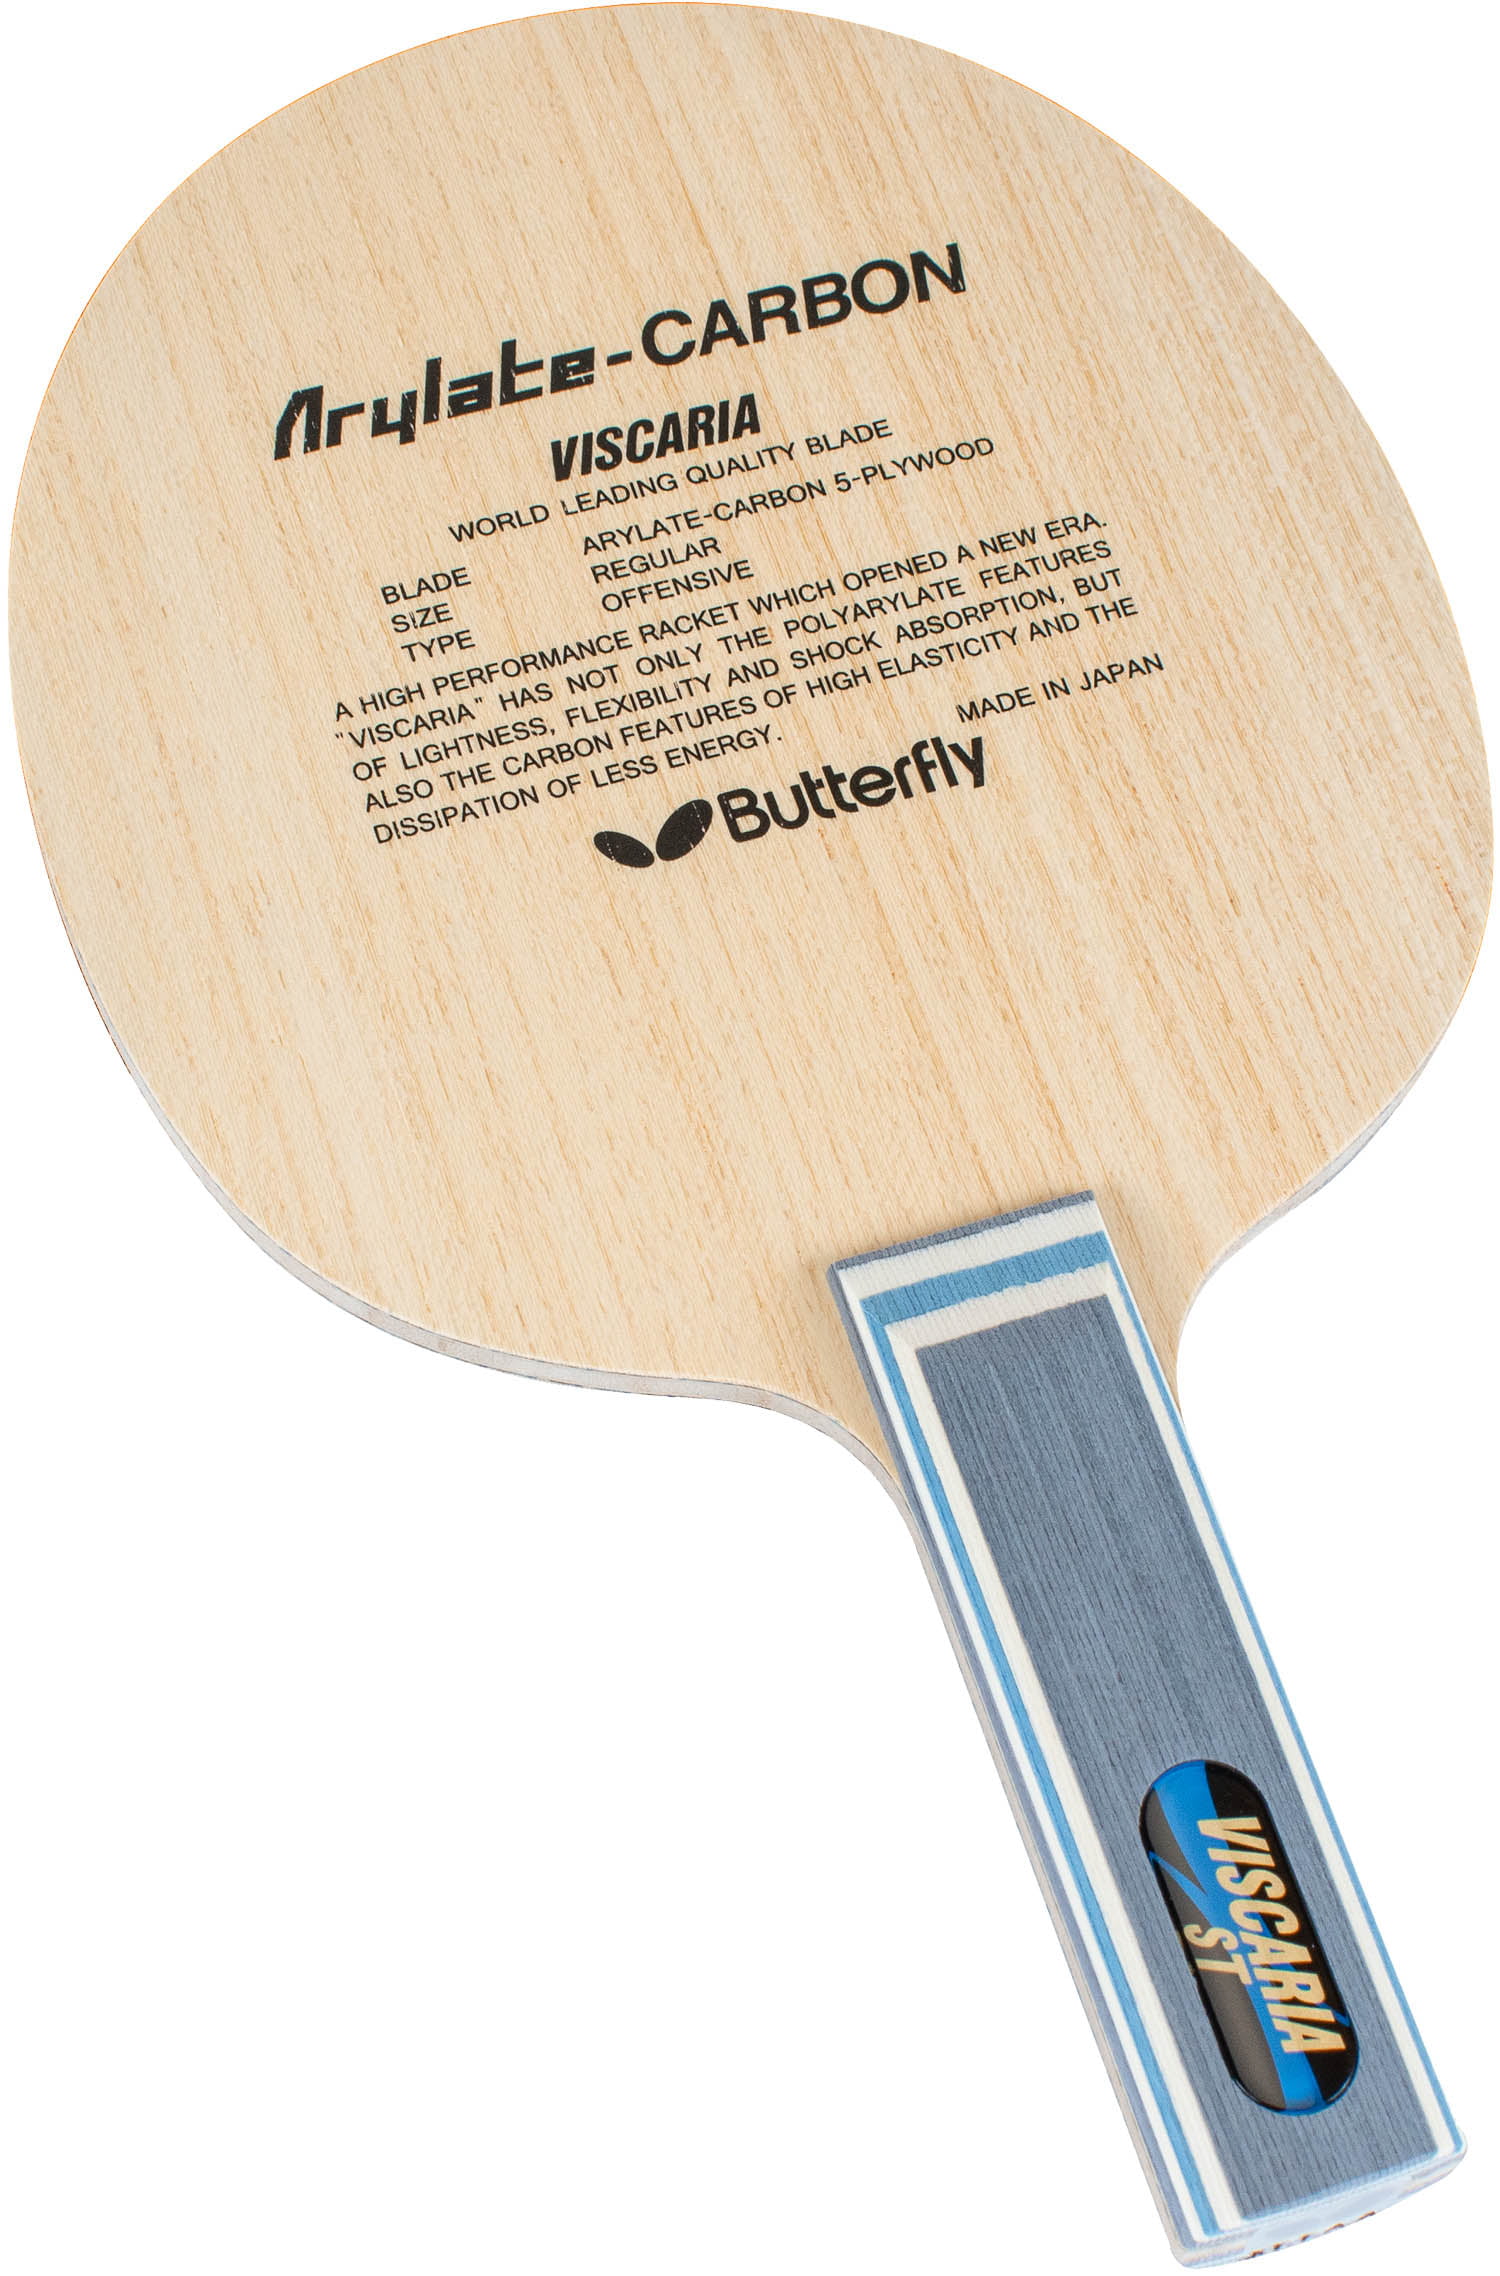 Butterfly Viscaria FL Blade Table Tennis Ping Pong Racket,Paddle Made in Japan